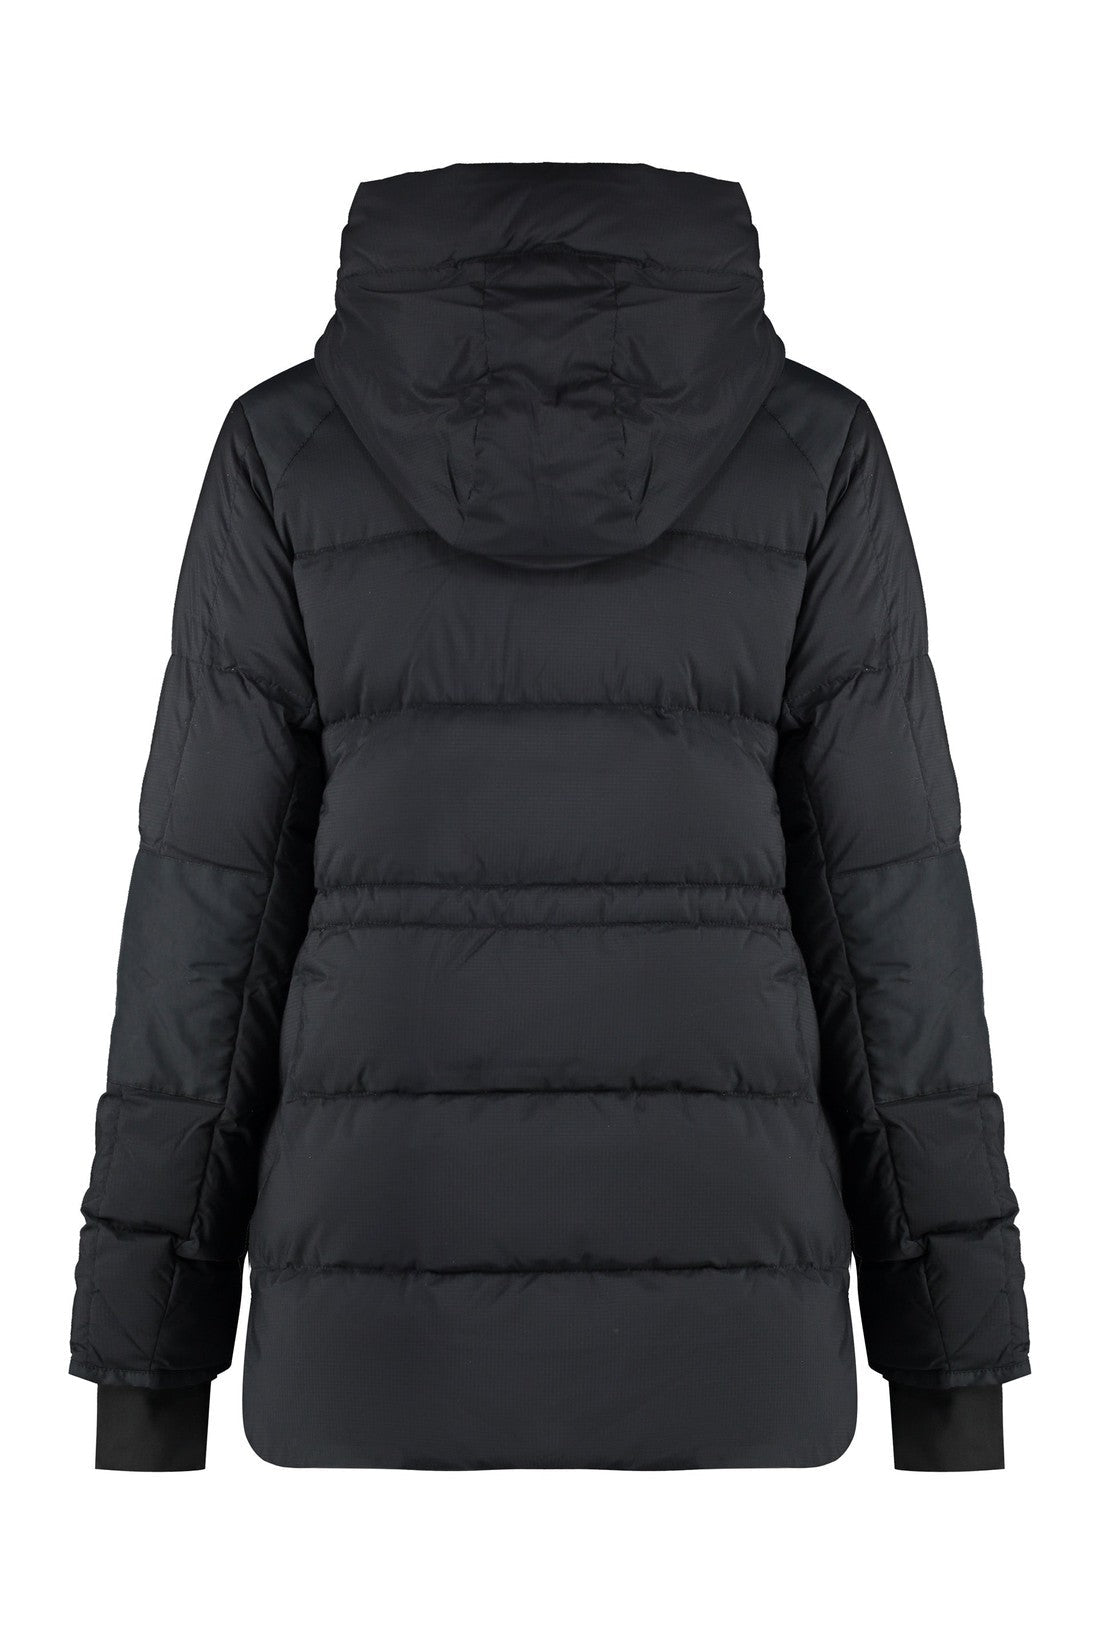 Canada Goose-OUTLET-SALE-Alliston hooded down jacket-ARCHIVIST